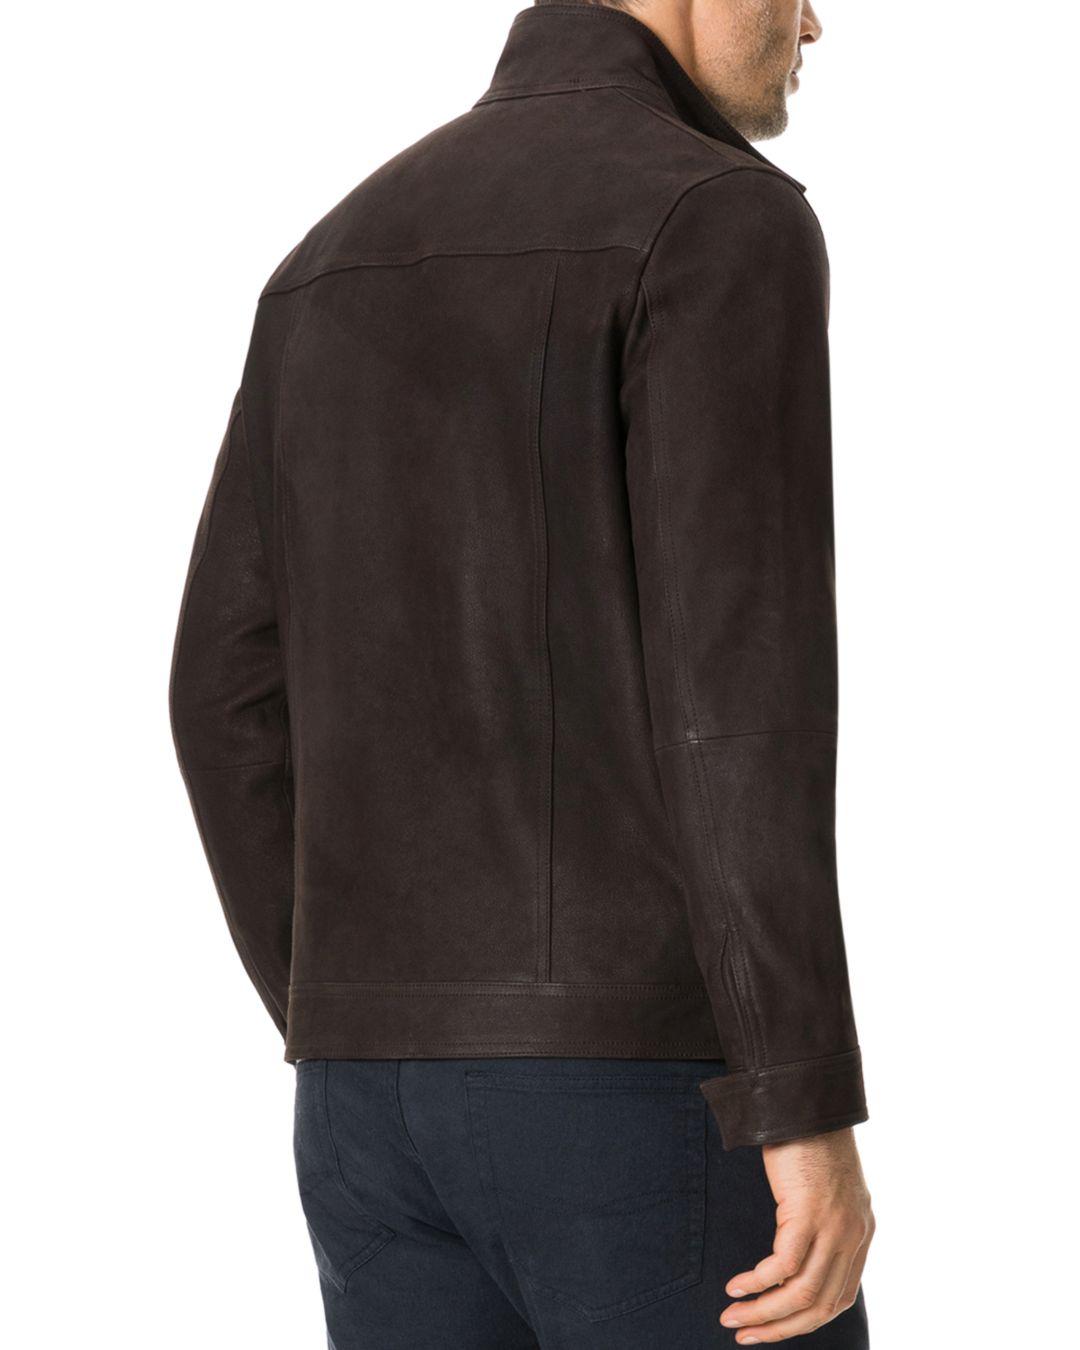 Rodd & Gunn Westhaven Leather Jacket in Chocolate (Brown) for 